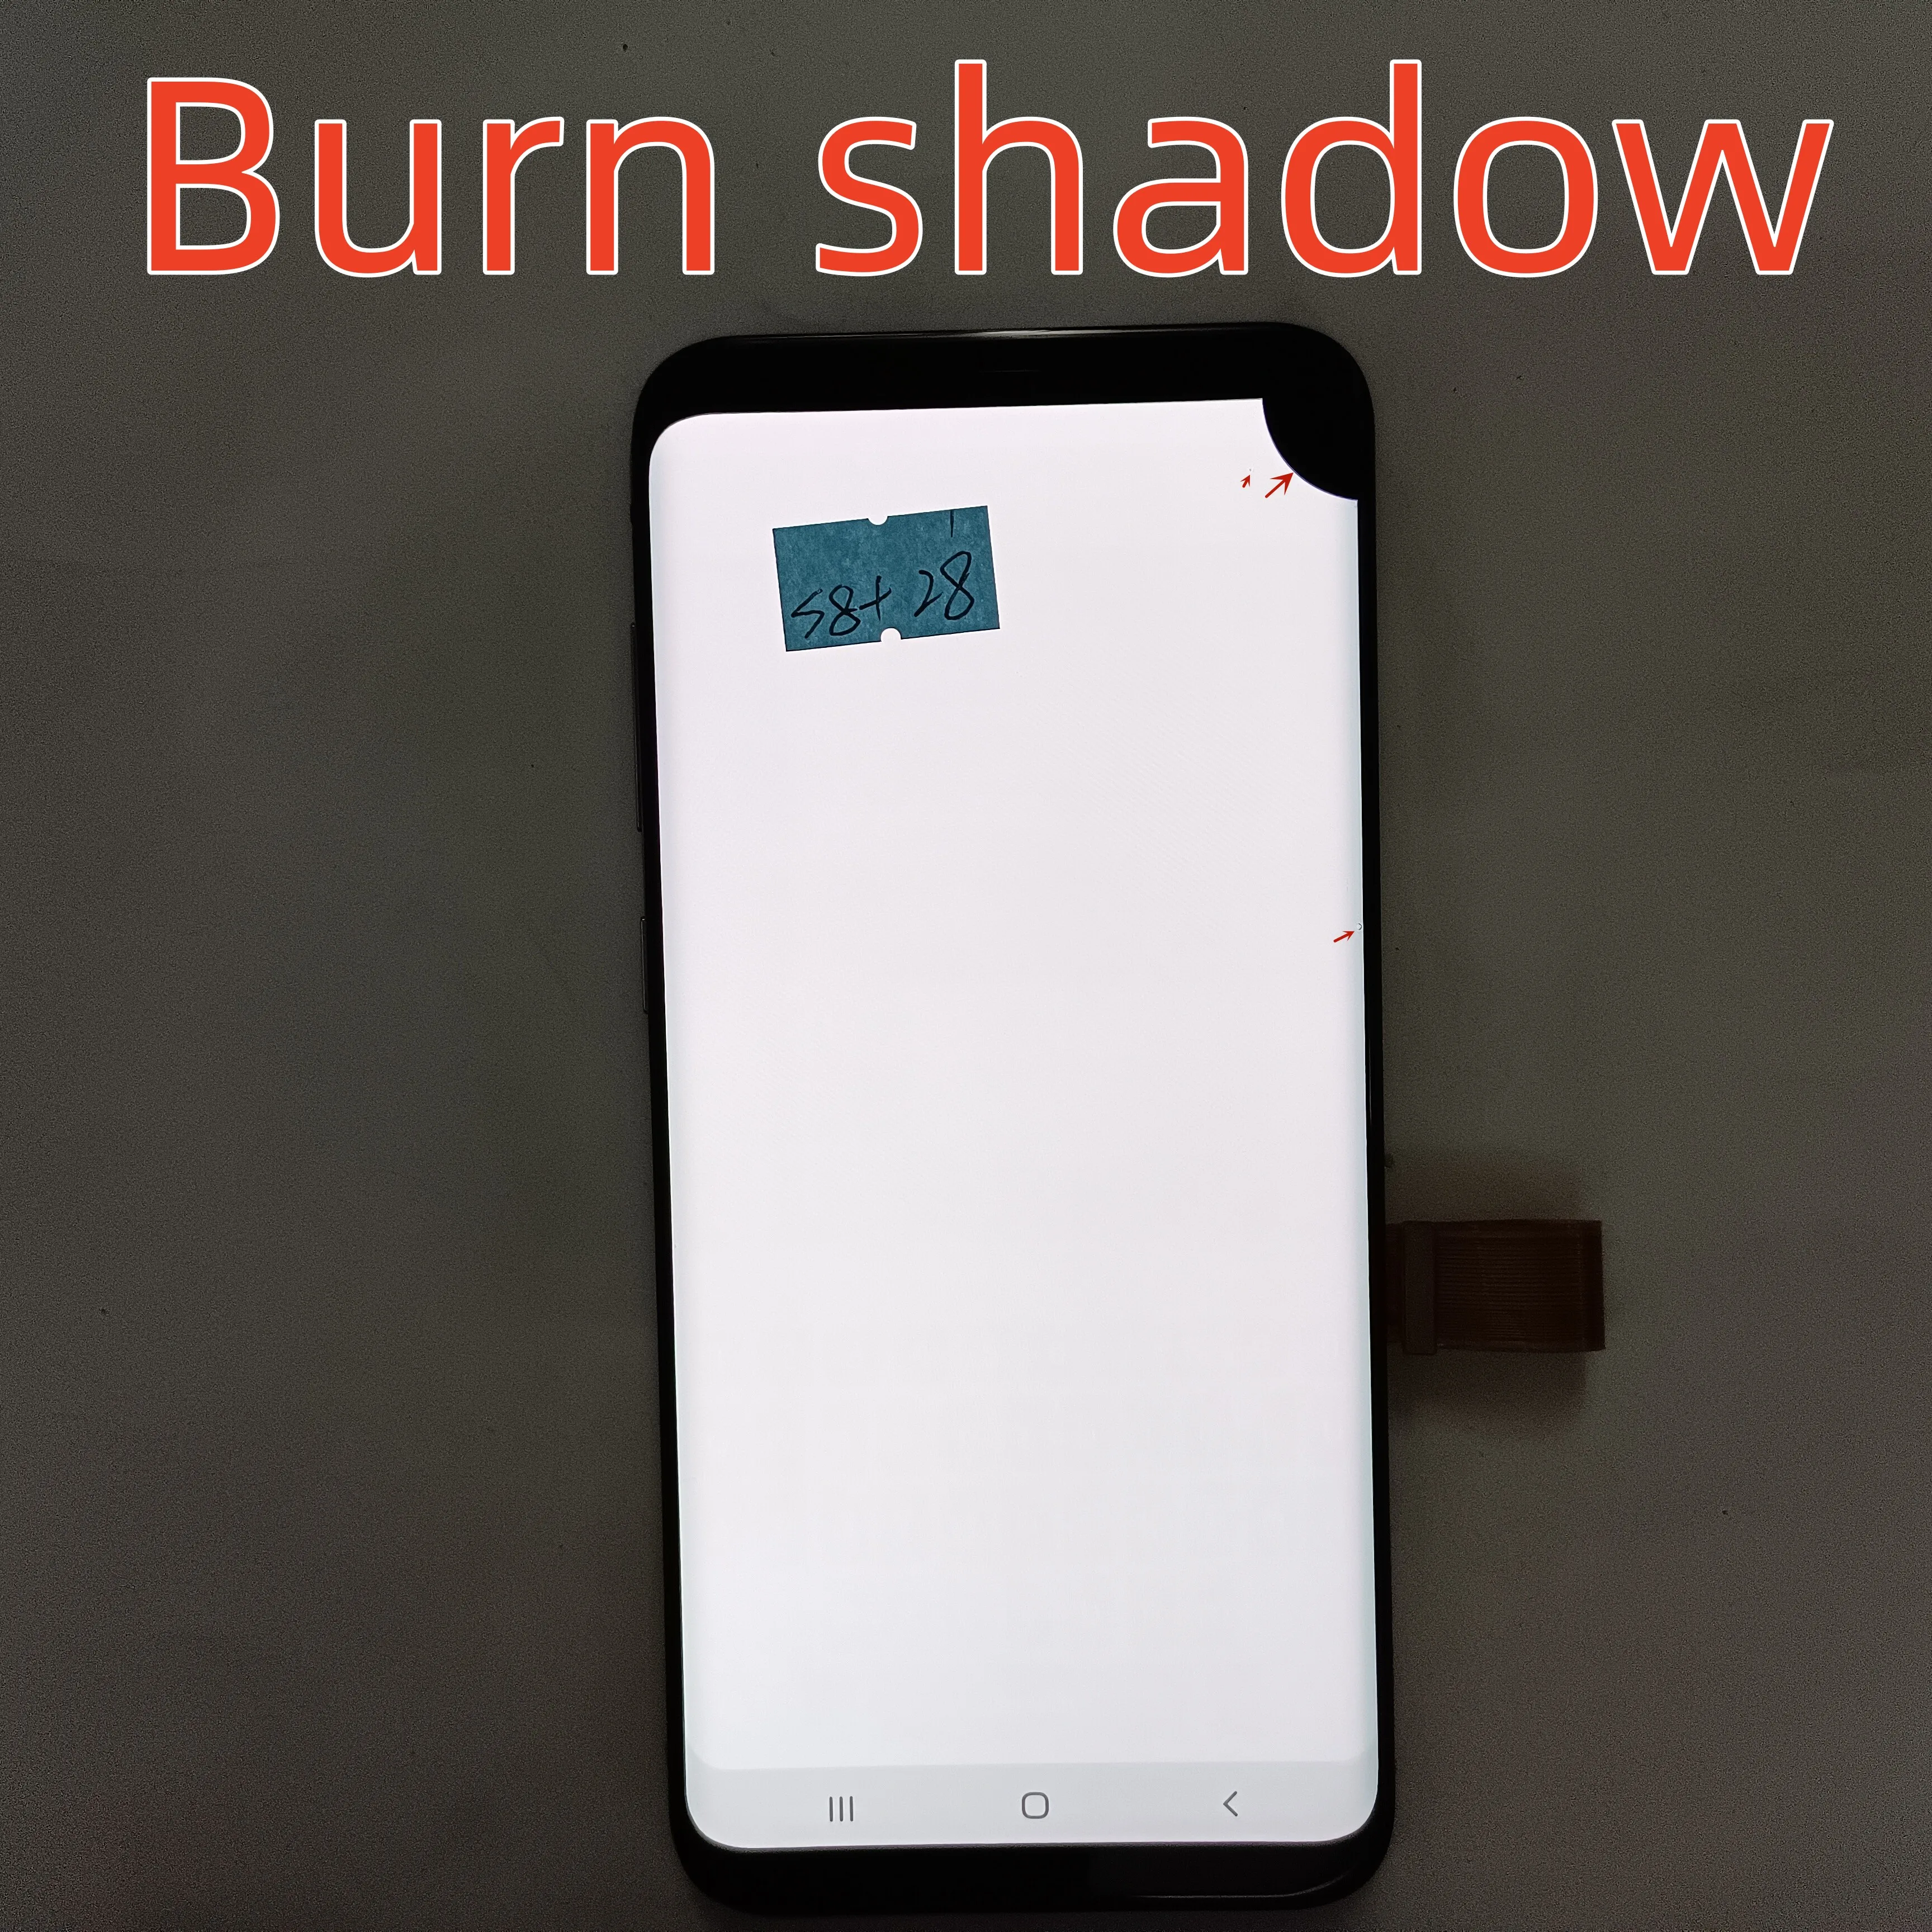 100% Original AMOLED 6.2" LCD For Samsung Galaxy S8 Plus G955 G955F LCD Display Touch Screen Digitizer Repair With burn shadow images - 6